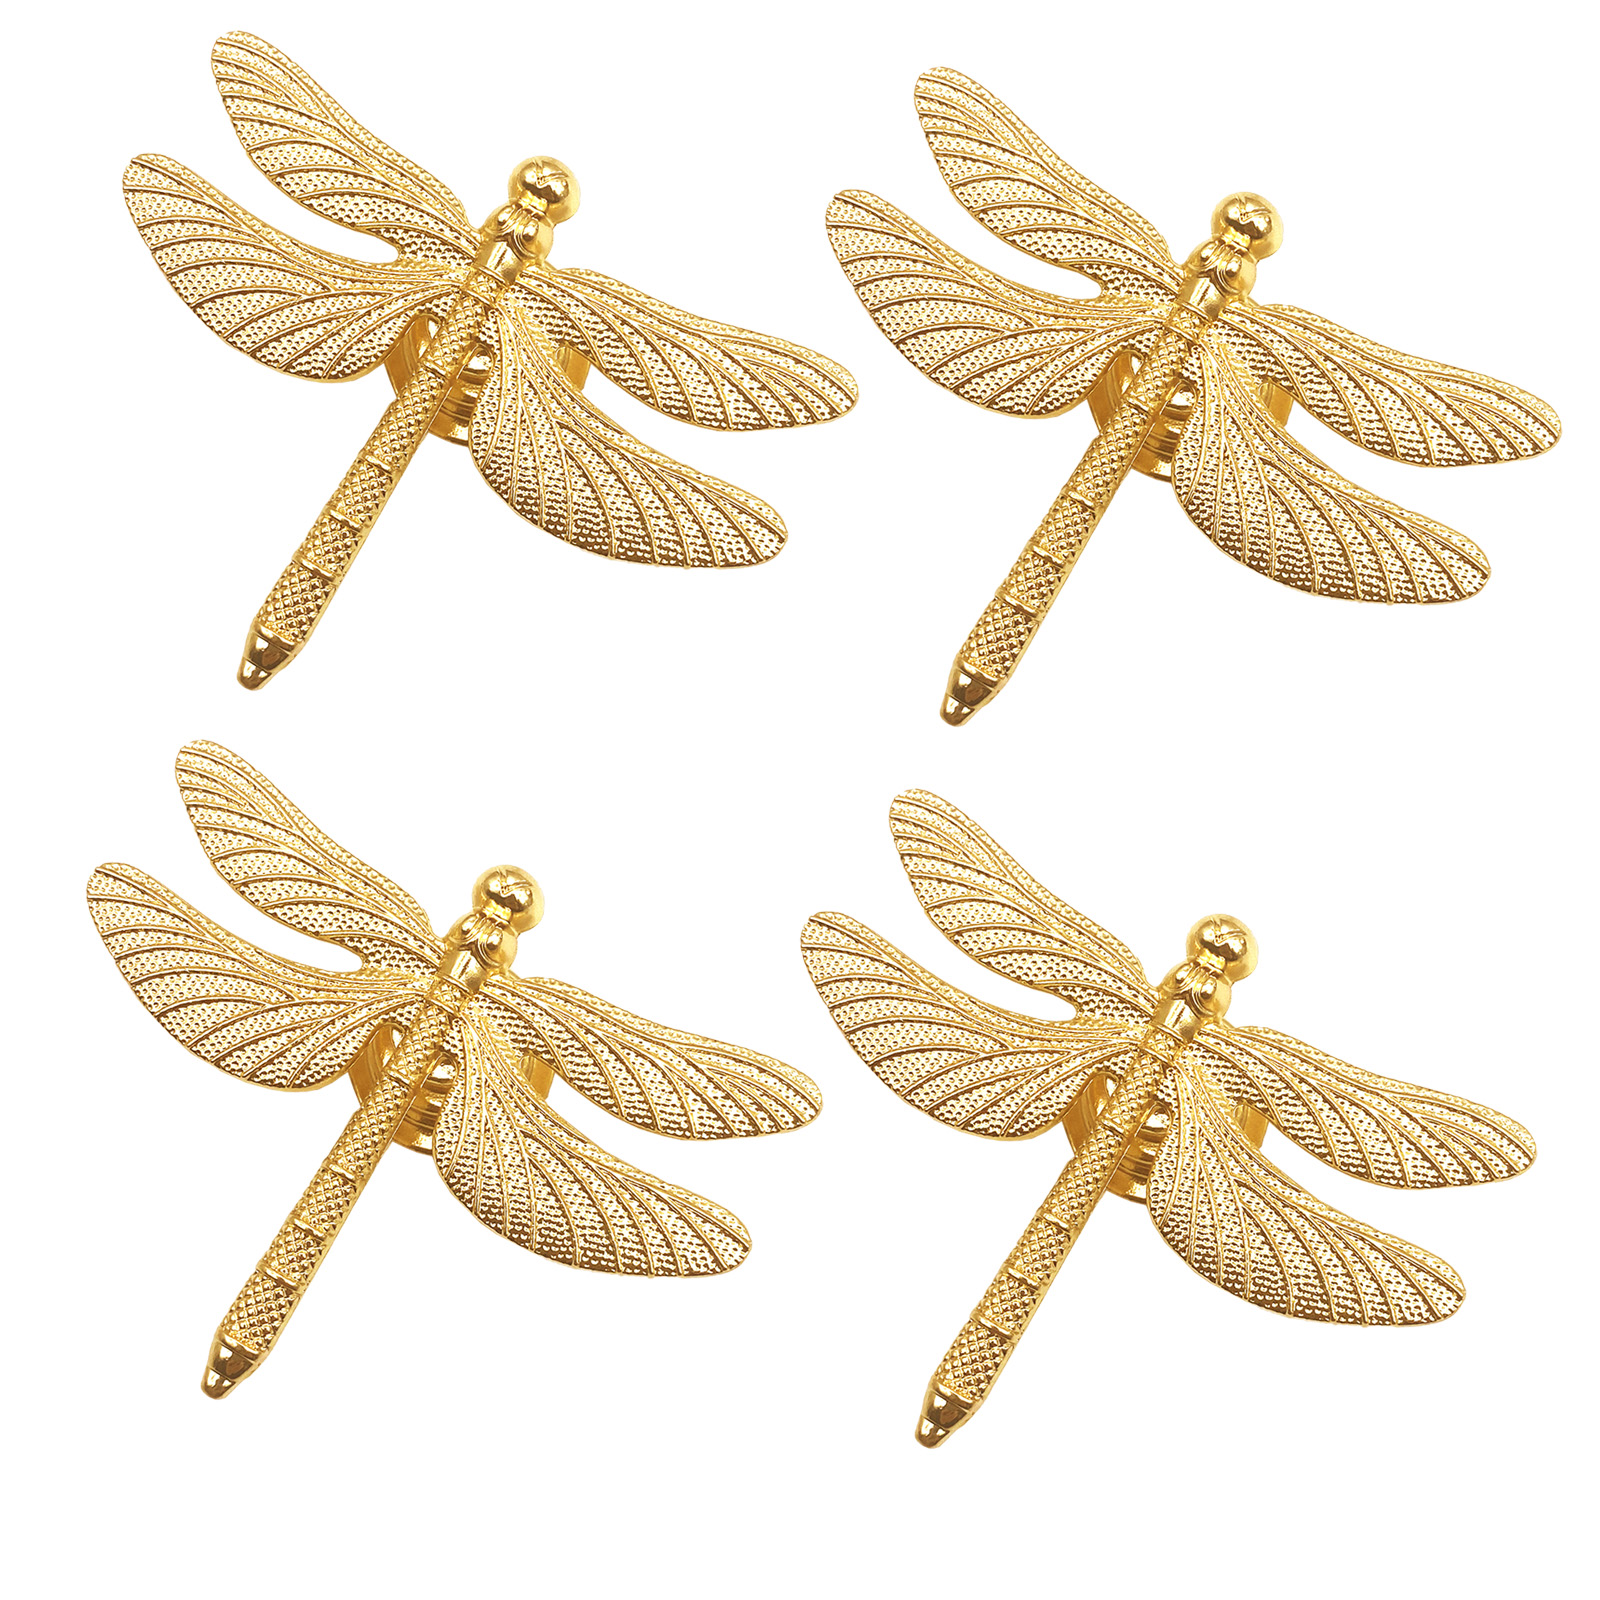 4 pcs Creative Dragonfly Knobs Drawer/Cabinet Pull Handles Alloy Cabinet Knobs Gold Drawer Cupboard Wardrobe Dresser Pulls Knobs Hardware - image 1 of 6